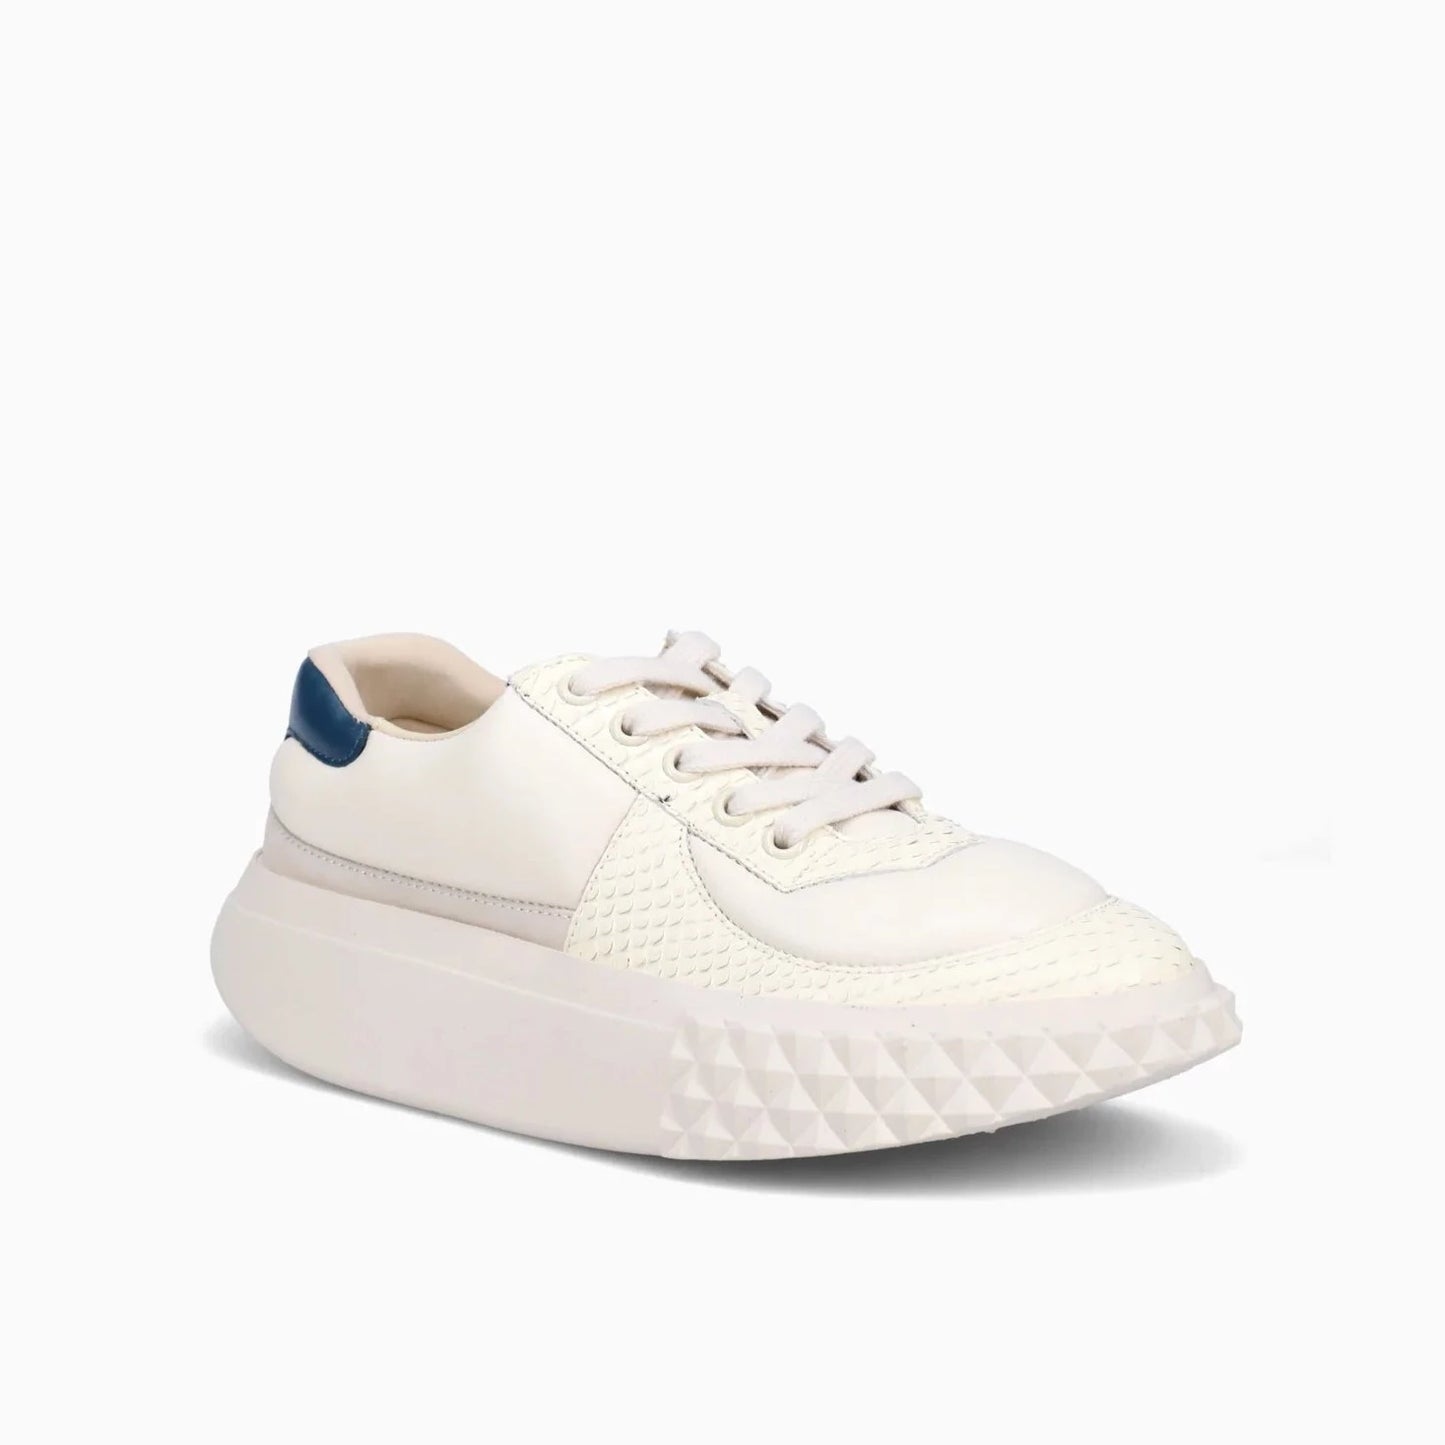 4CCCCEES | WOMEN'S SNEAKERS | BILLOW SUN IVORY | WHITE